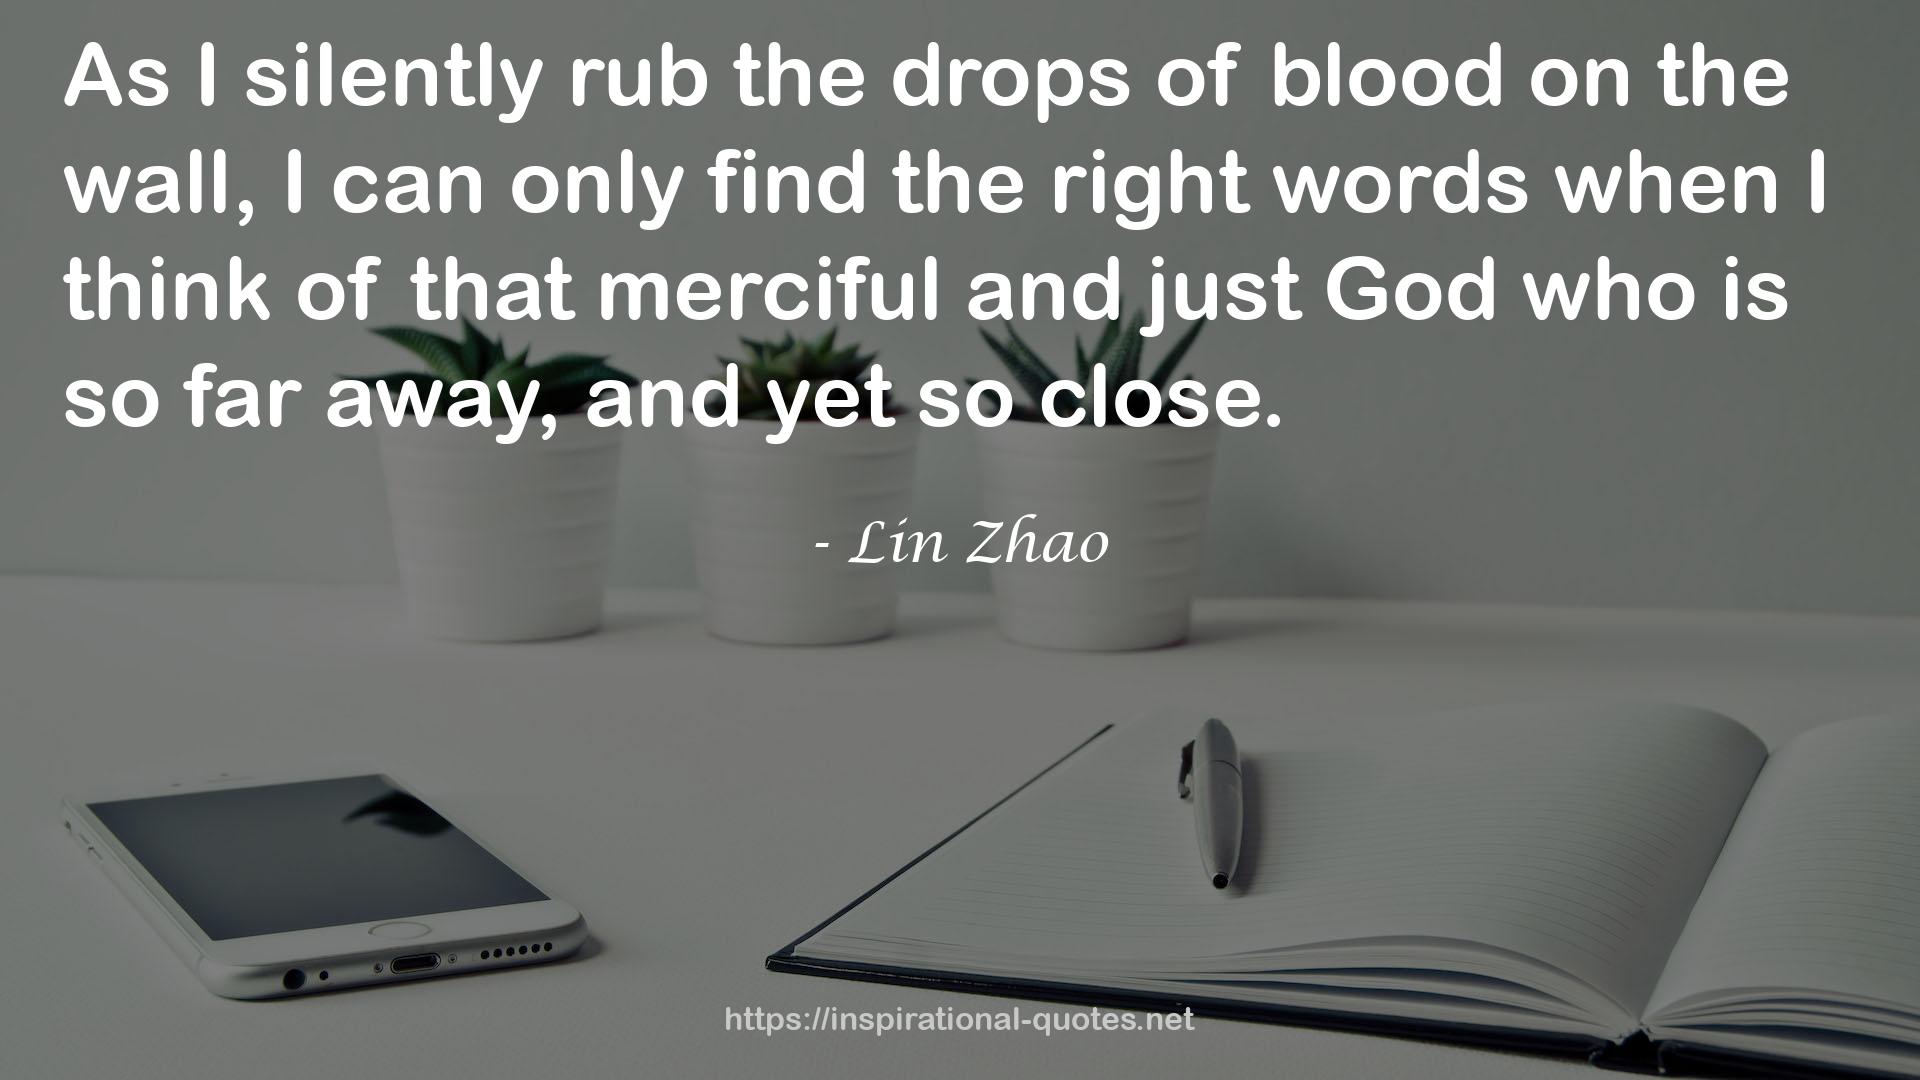 Lin Zhao QUOTES